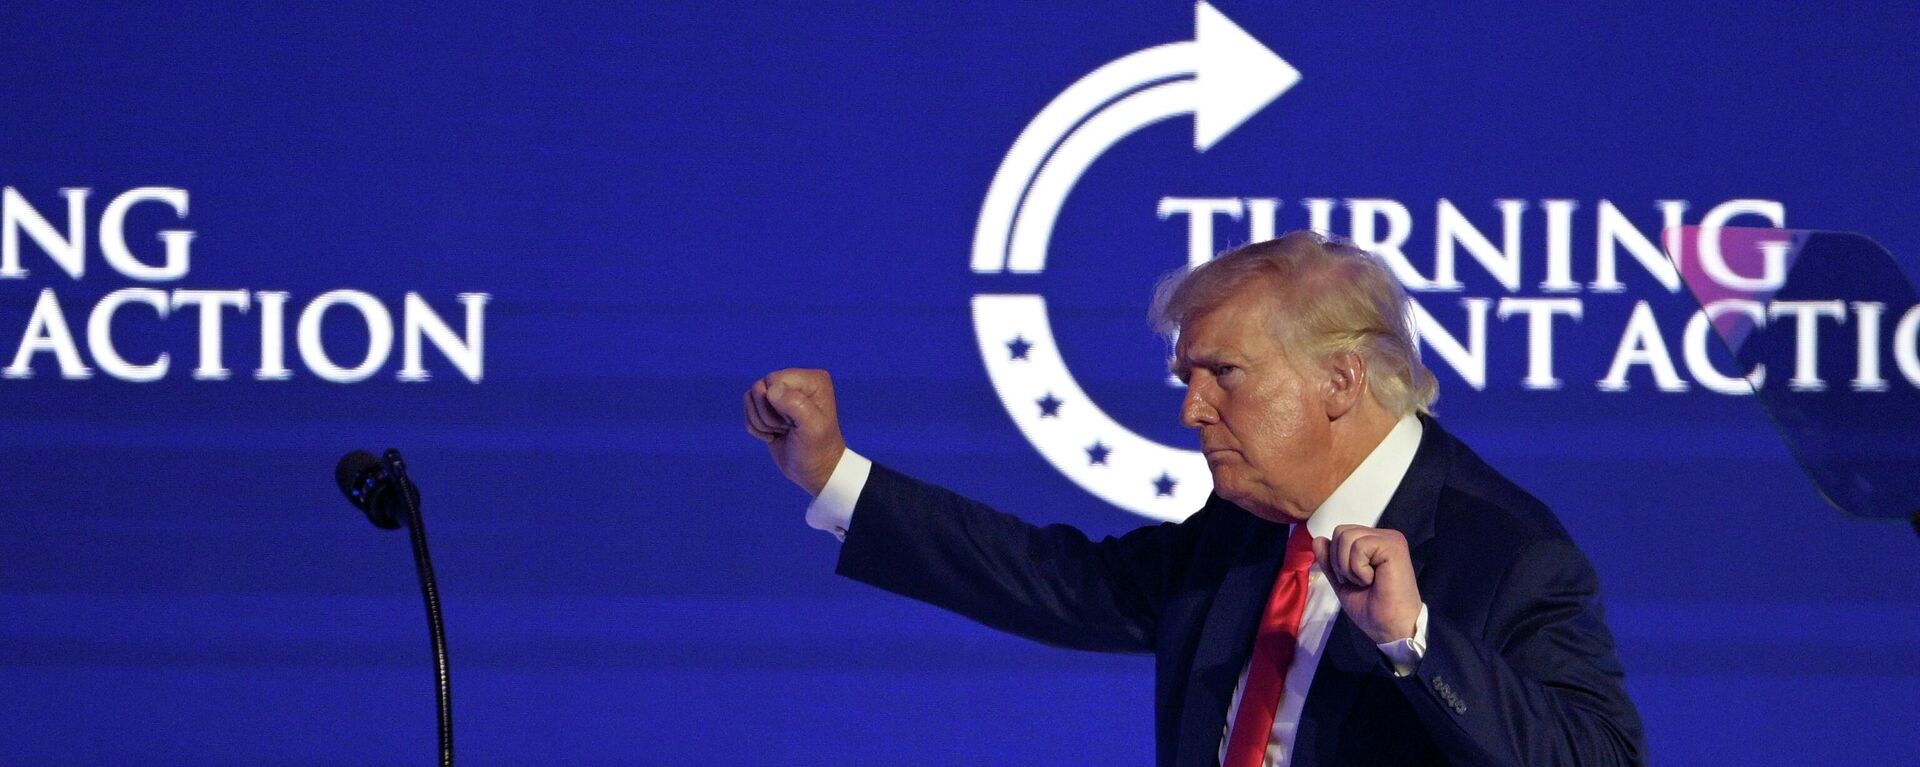 Former President Donald Trump dances on stage after addressing attendees during the Turning Point USA Student Action Summit, Saturday, July 23, 2022, in Tampa, Fla. - Sputnik International, 1920, 10.08.2022